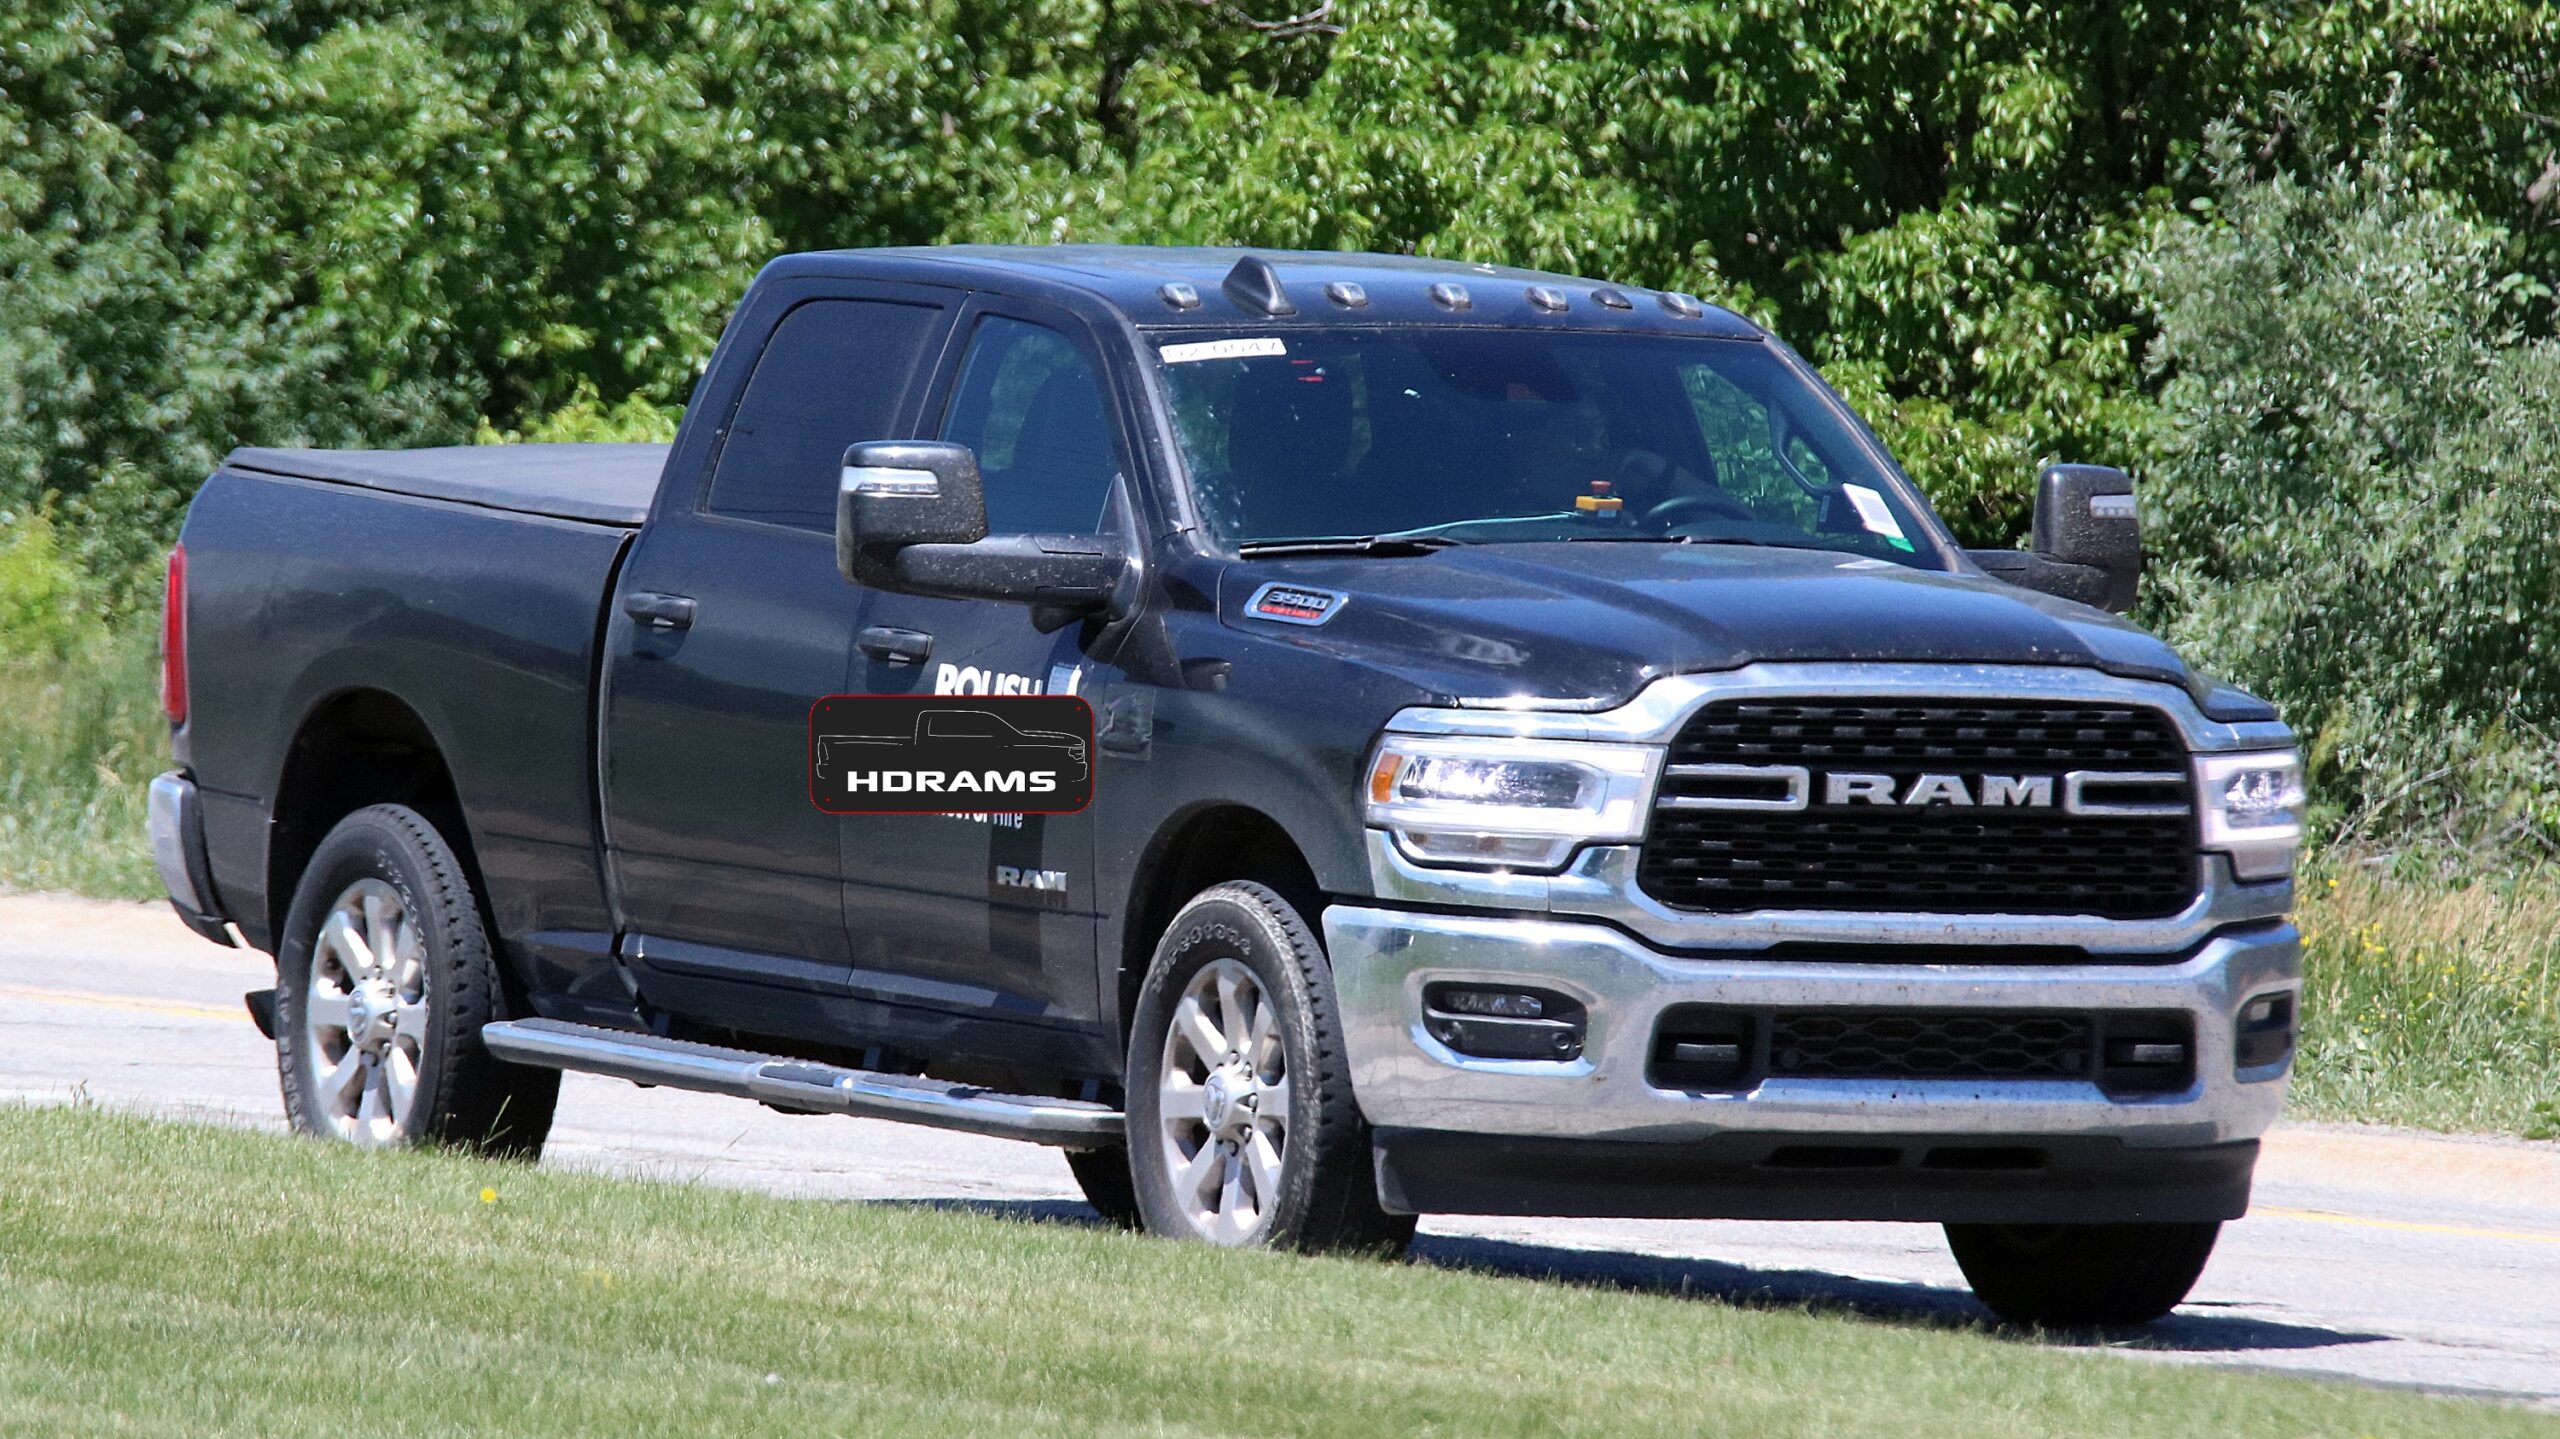 SPOTTED: 2023 Ram 3500 Big Horn Crew Cab 4x2 Out On Public Roads!